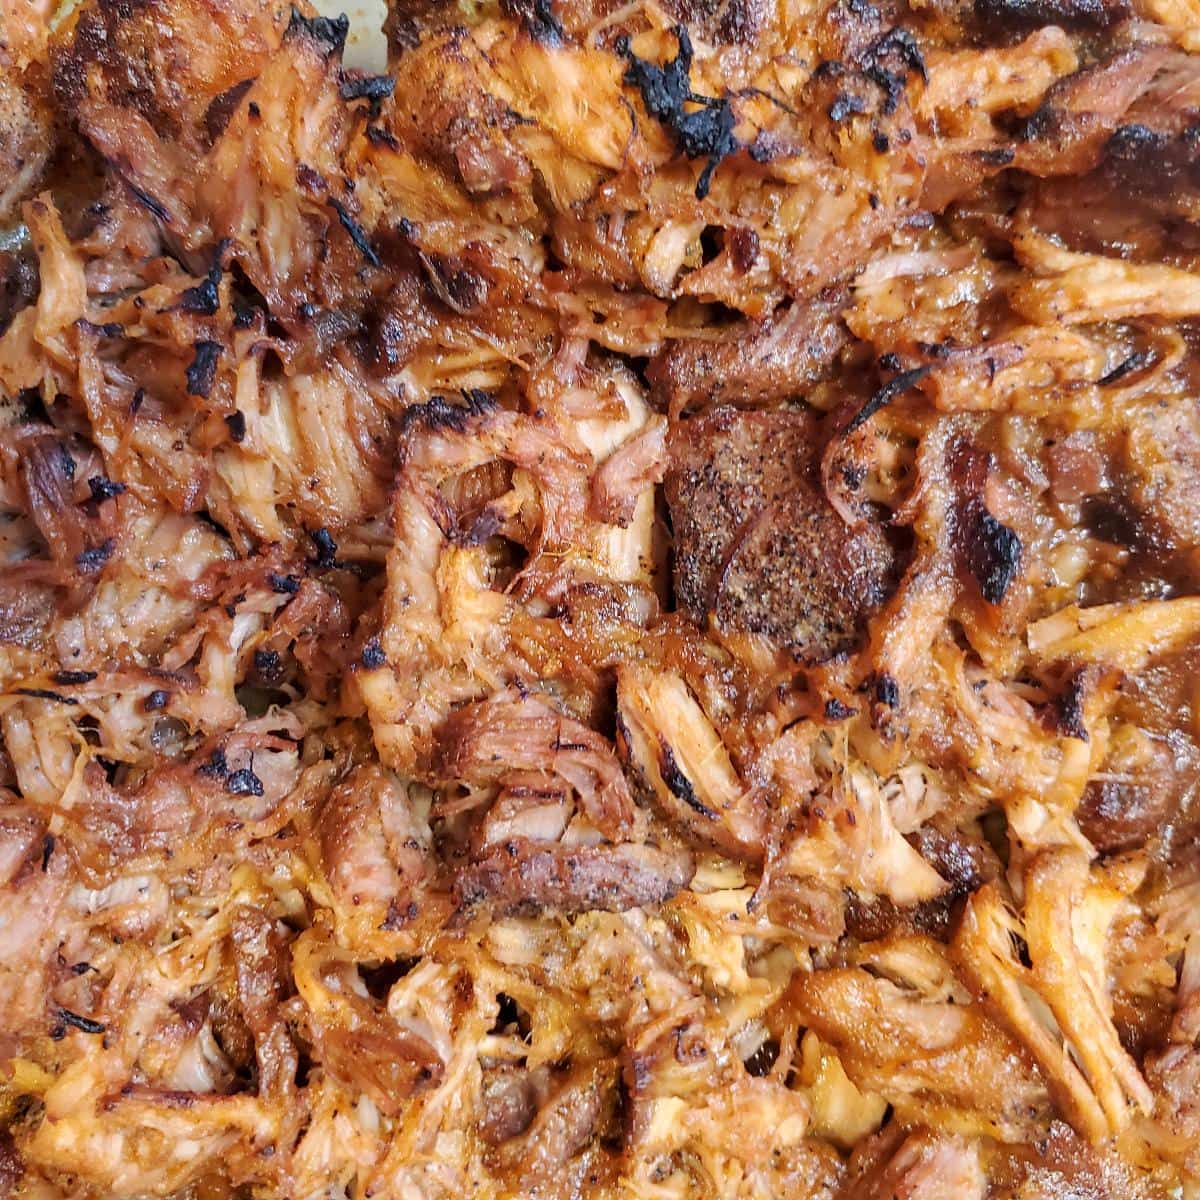 How to Make Pulled Pork in the Oven